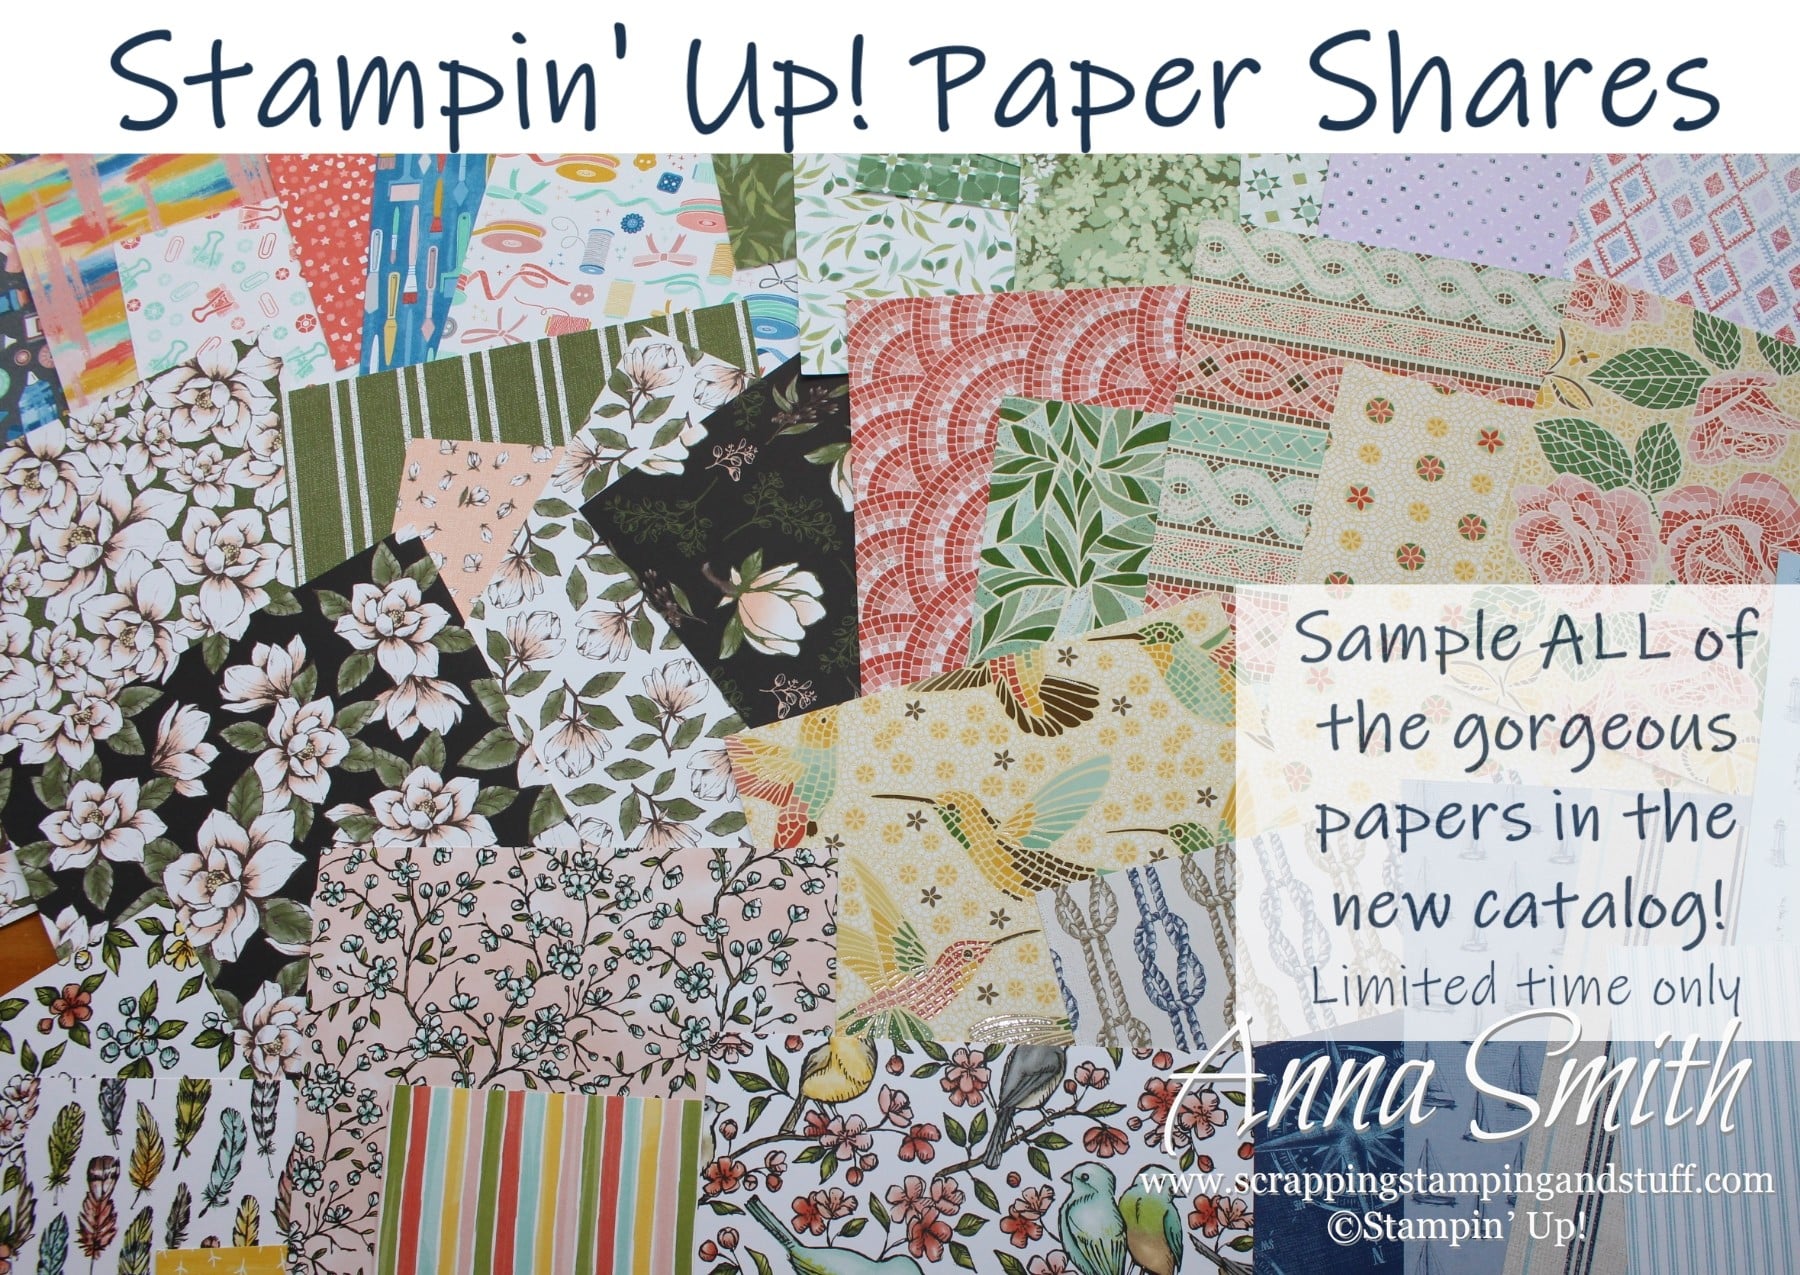 Last Day to Order Paper Shares!